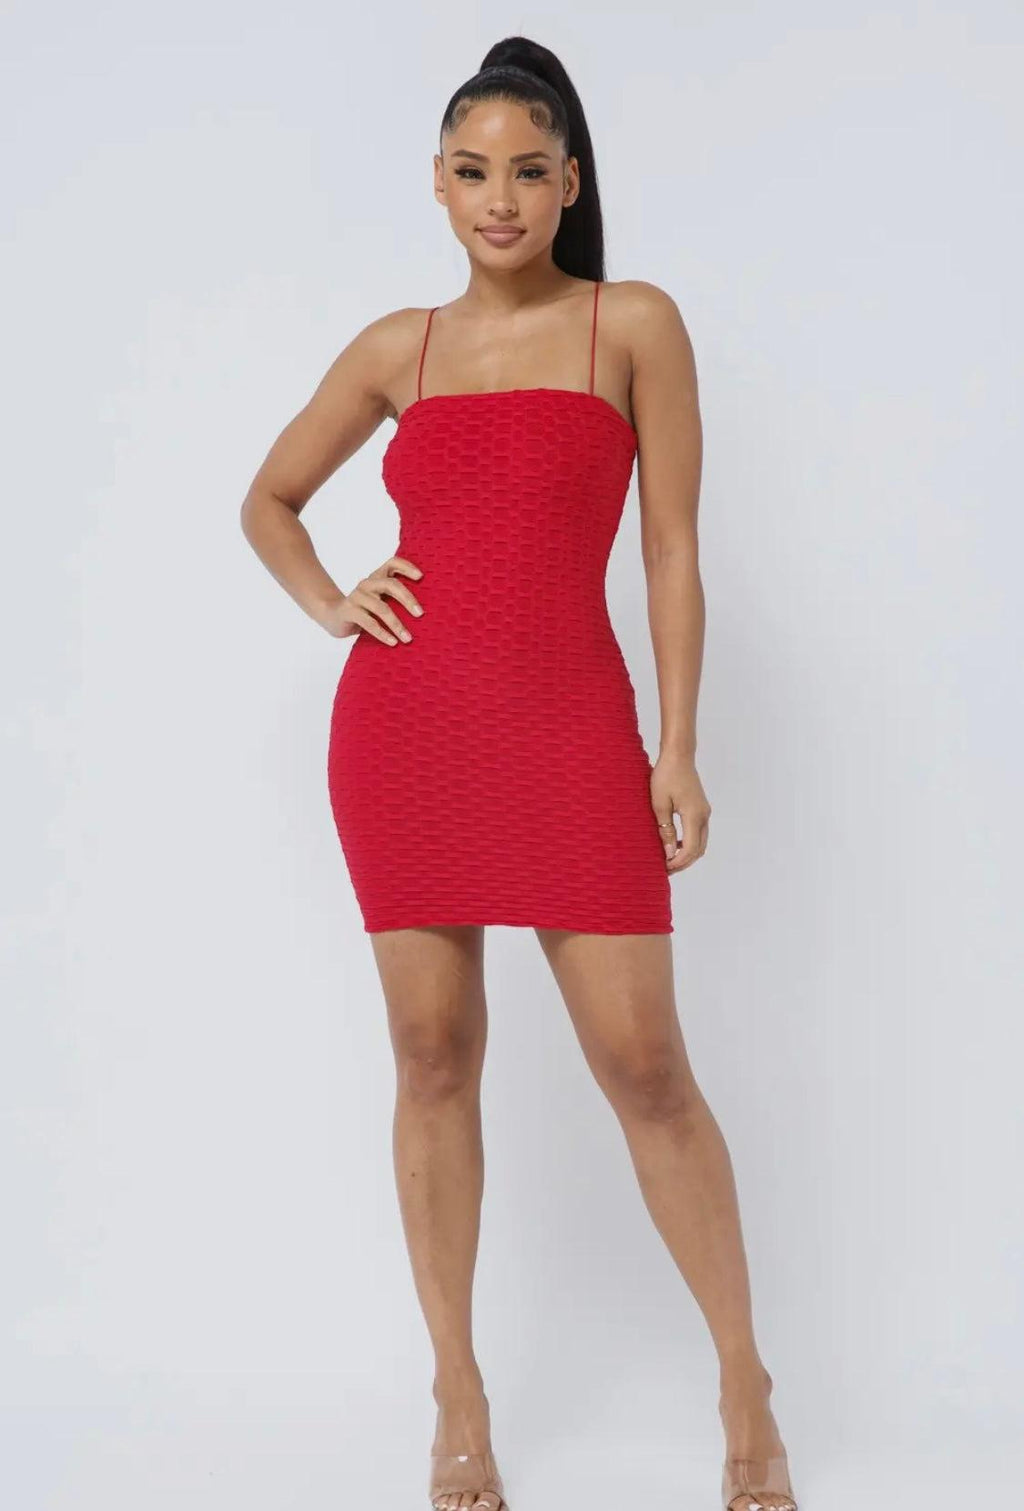 Red Mini Dress-150 Dresses-Bodycon Dress, Date Night Dress, Dress, Holiday Red Mini Dress, Max Retail, Pink Friday, sale, Sale Dress-[option4]-[option5]-[option6]-Womens-USA-Clothing-Boutique-Shop-Online-Clothes Minded